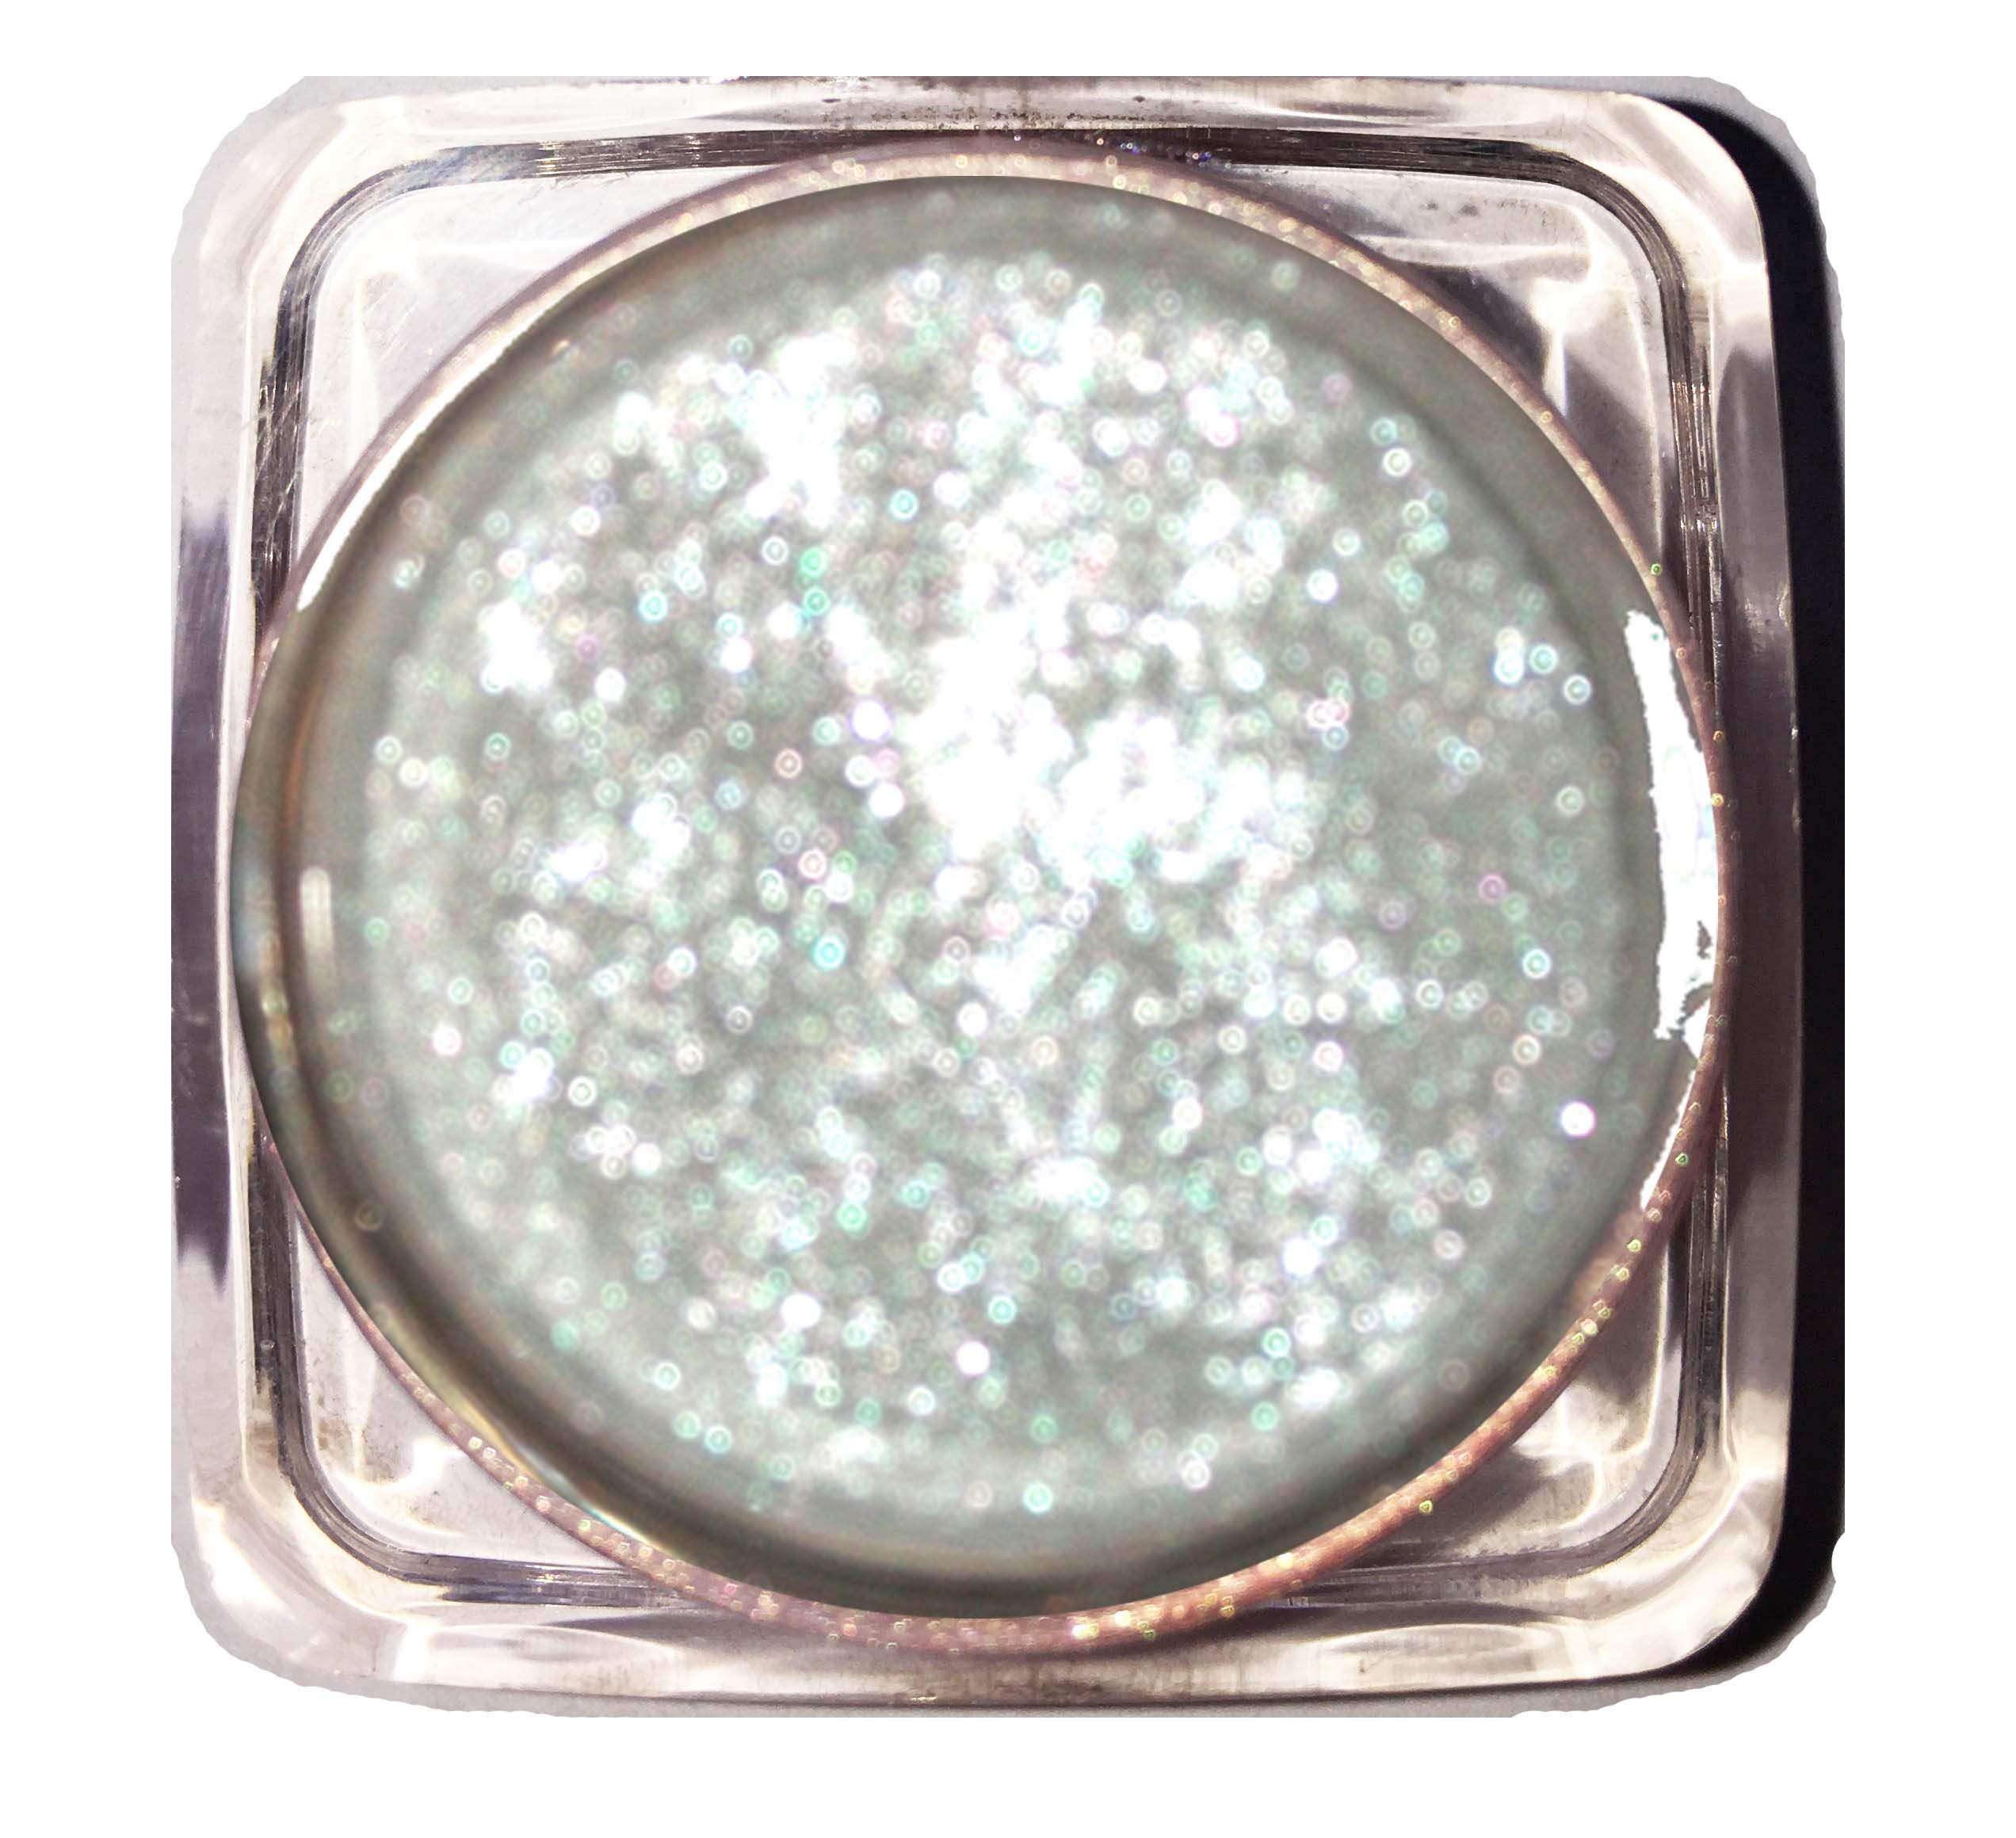 WICKED Black Glitter Line All Natural Loose Eye Shadow Pigment 2g - Shimmer  Finish Gluten & Chemical Free Cosmetics by Ultimo Minerals